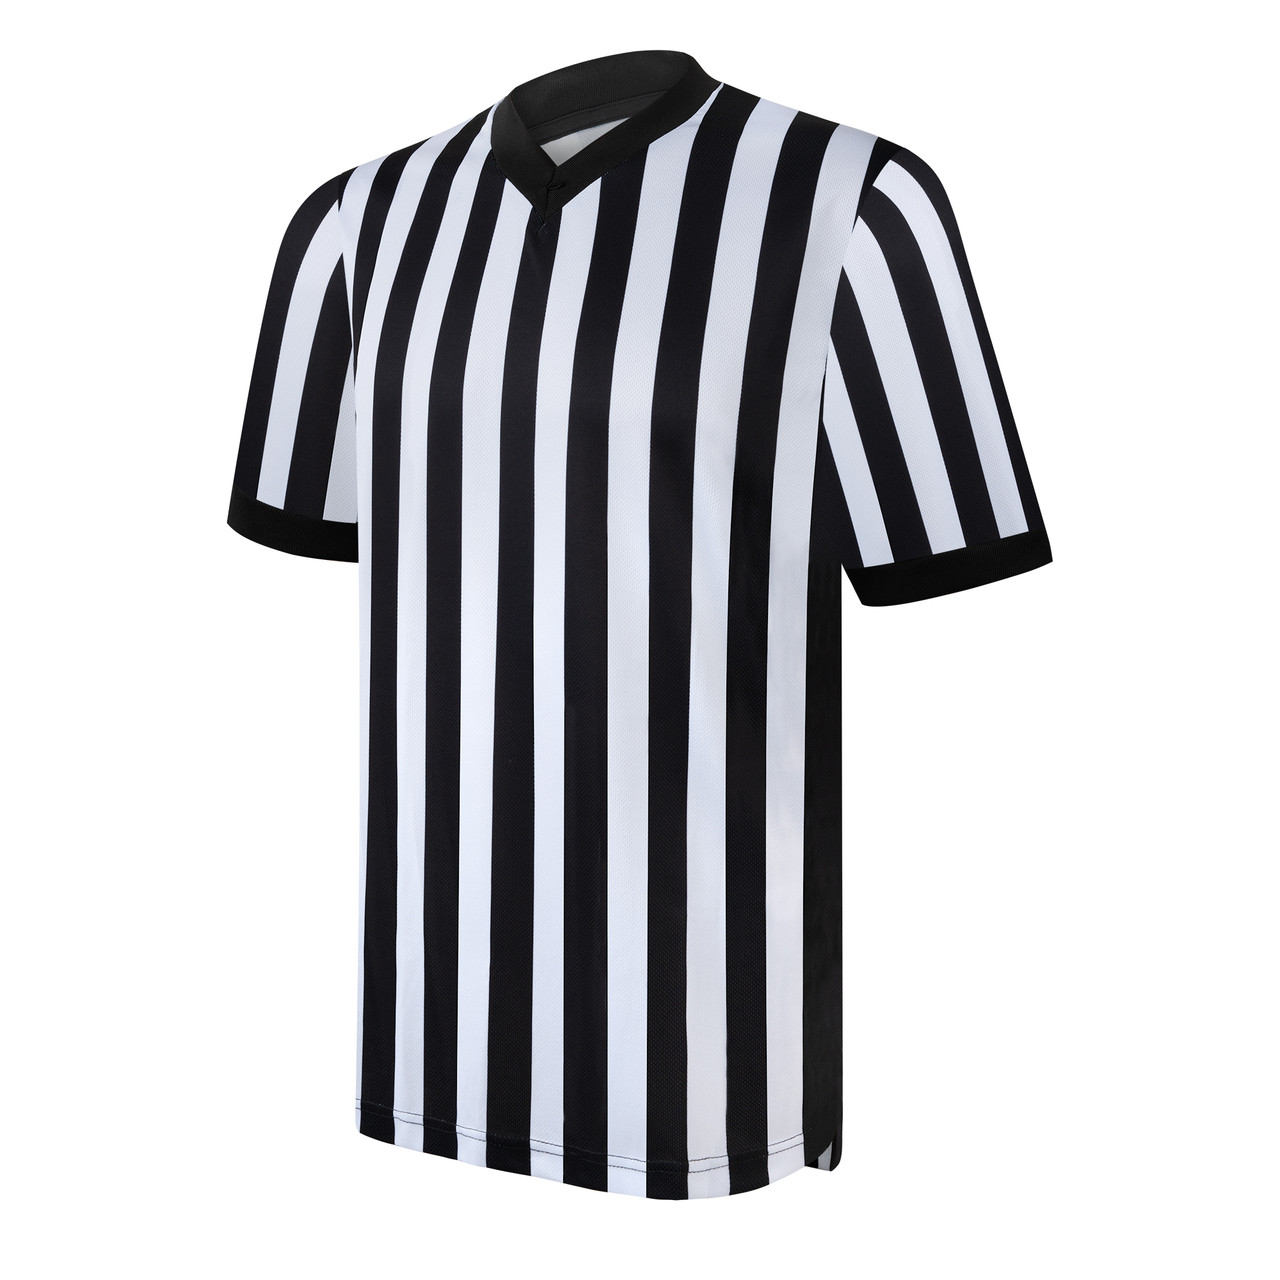 Smitty Performance Mesh V-Neck Referee Shirt with Side Panels